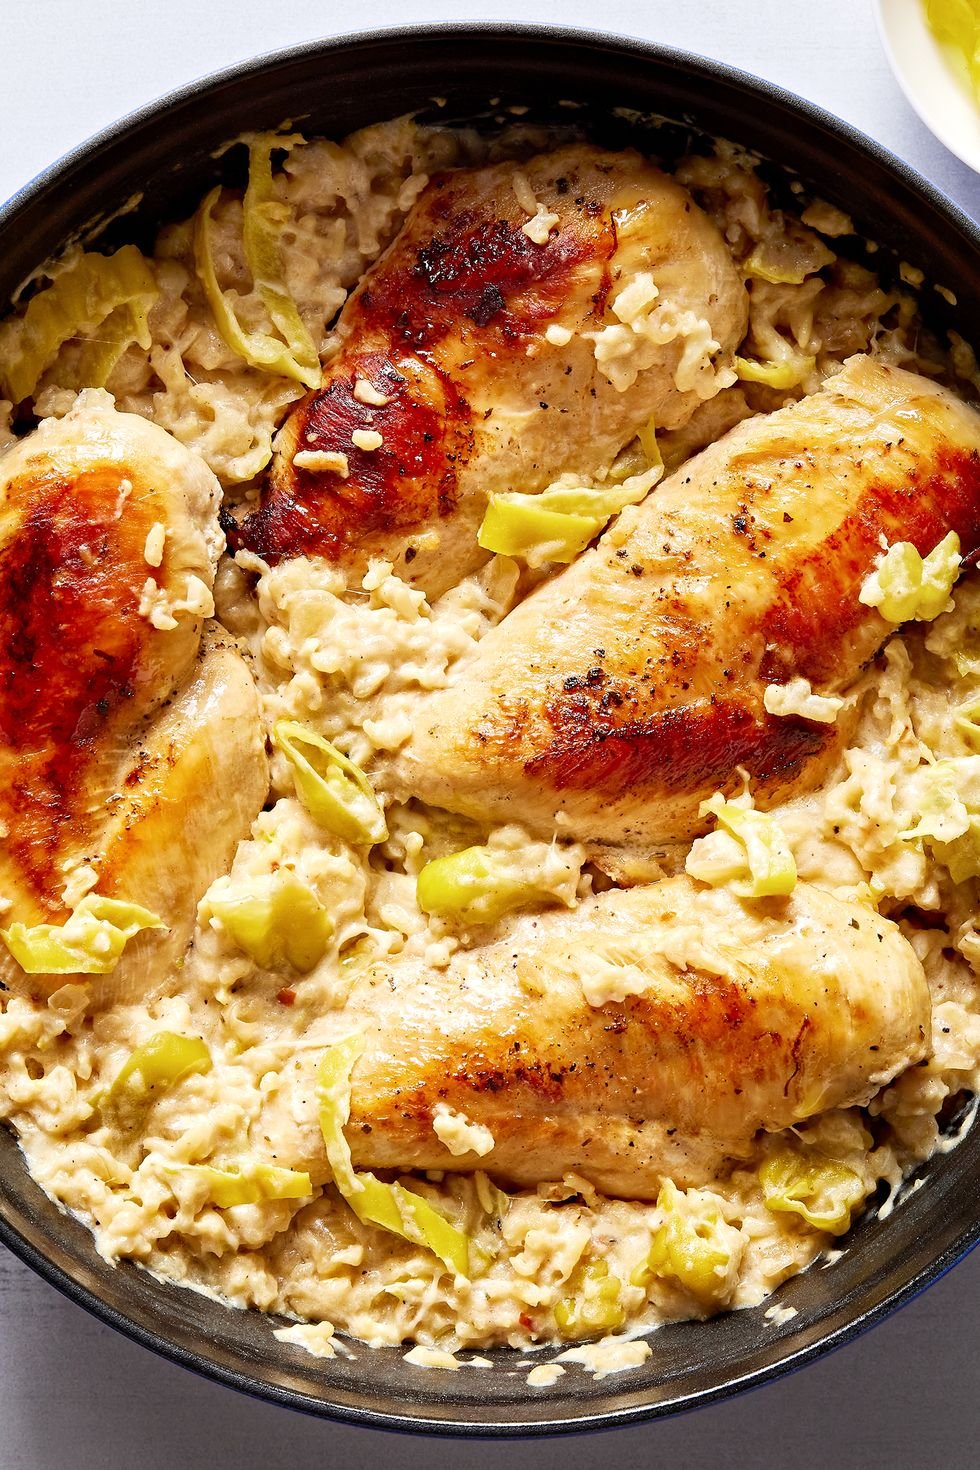 A chicken, pepper and rice dish in a pan.